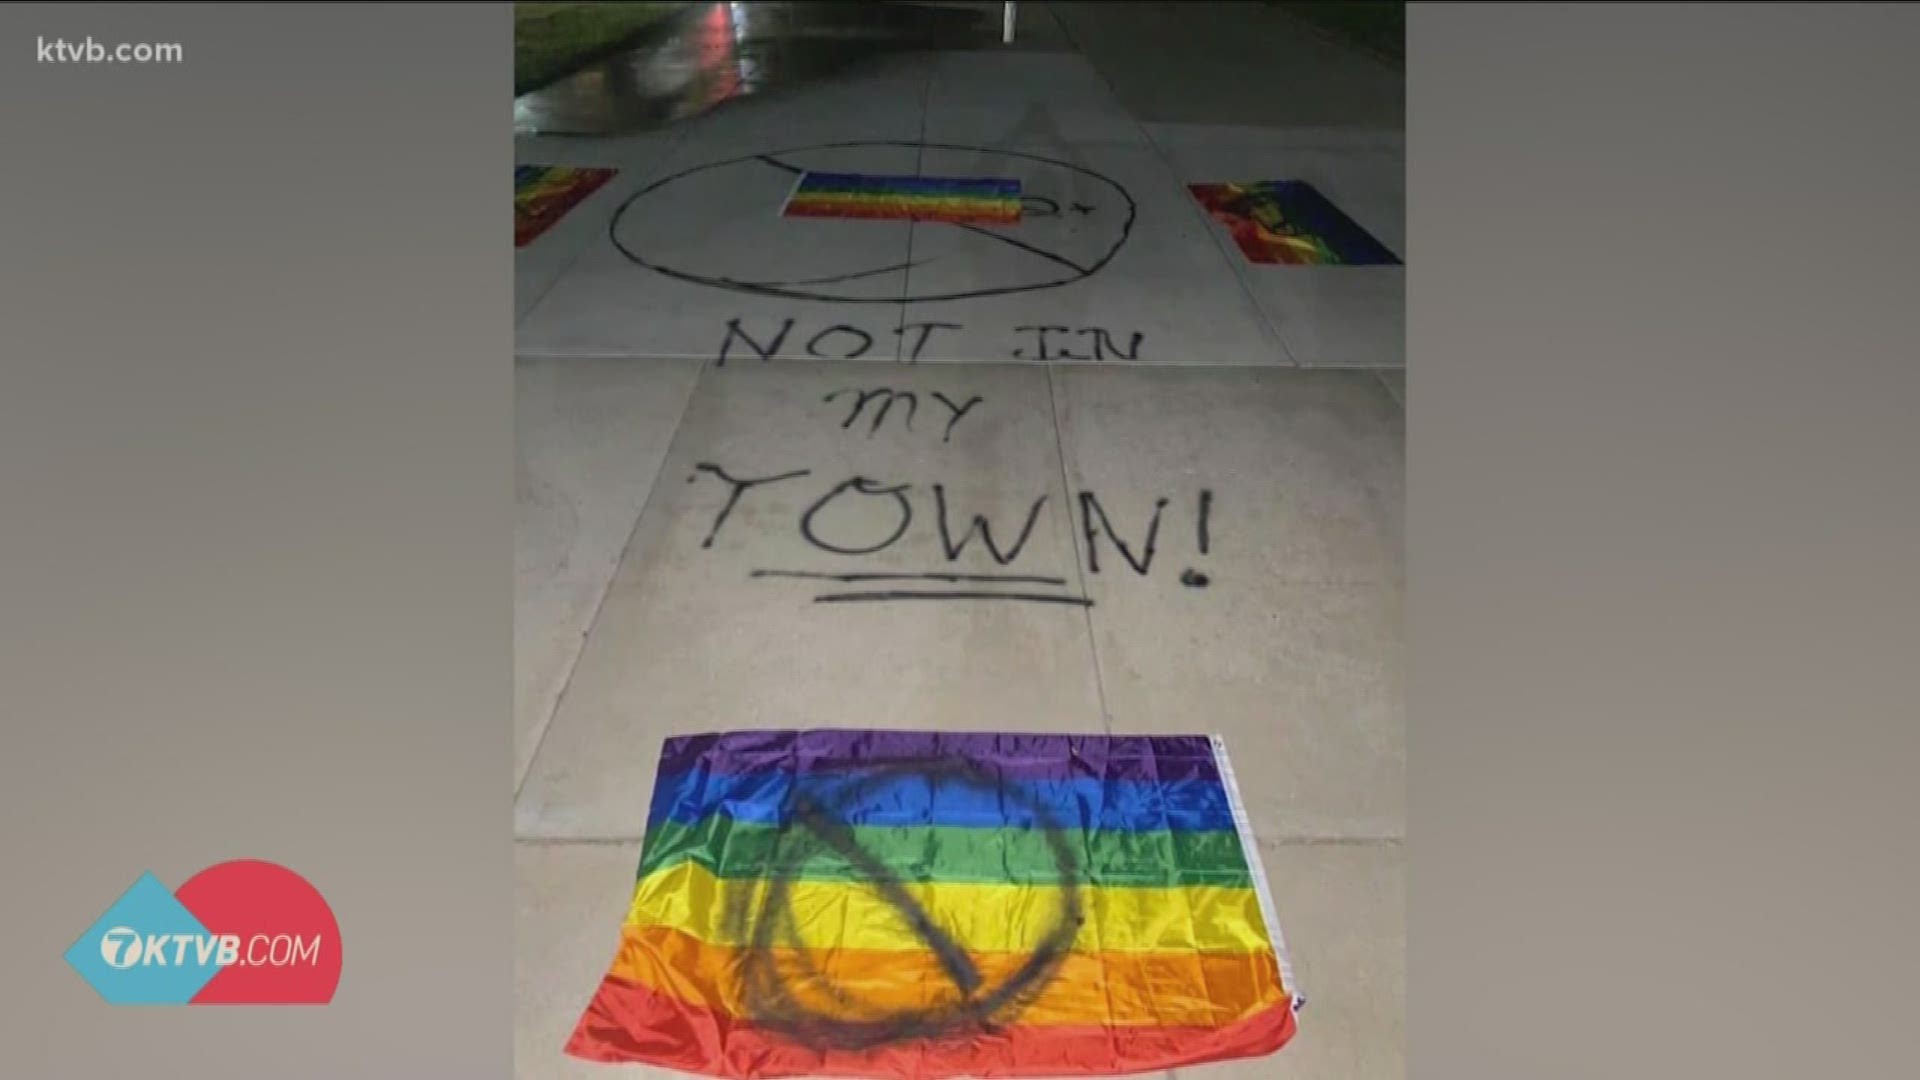 Caldwell Police are investigating the flag vandalism as a hate crime.